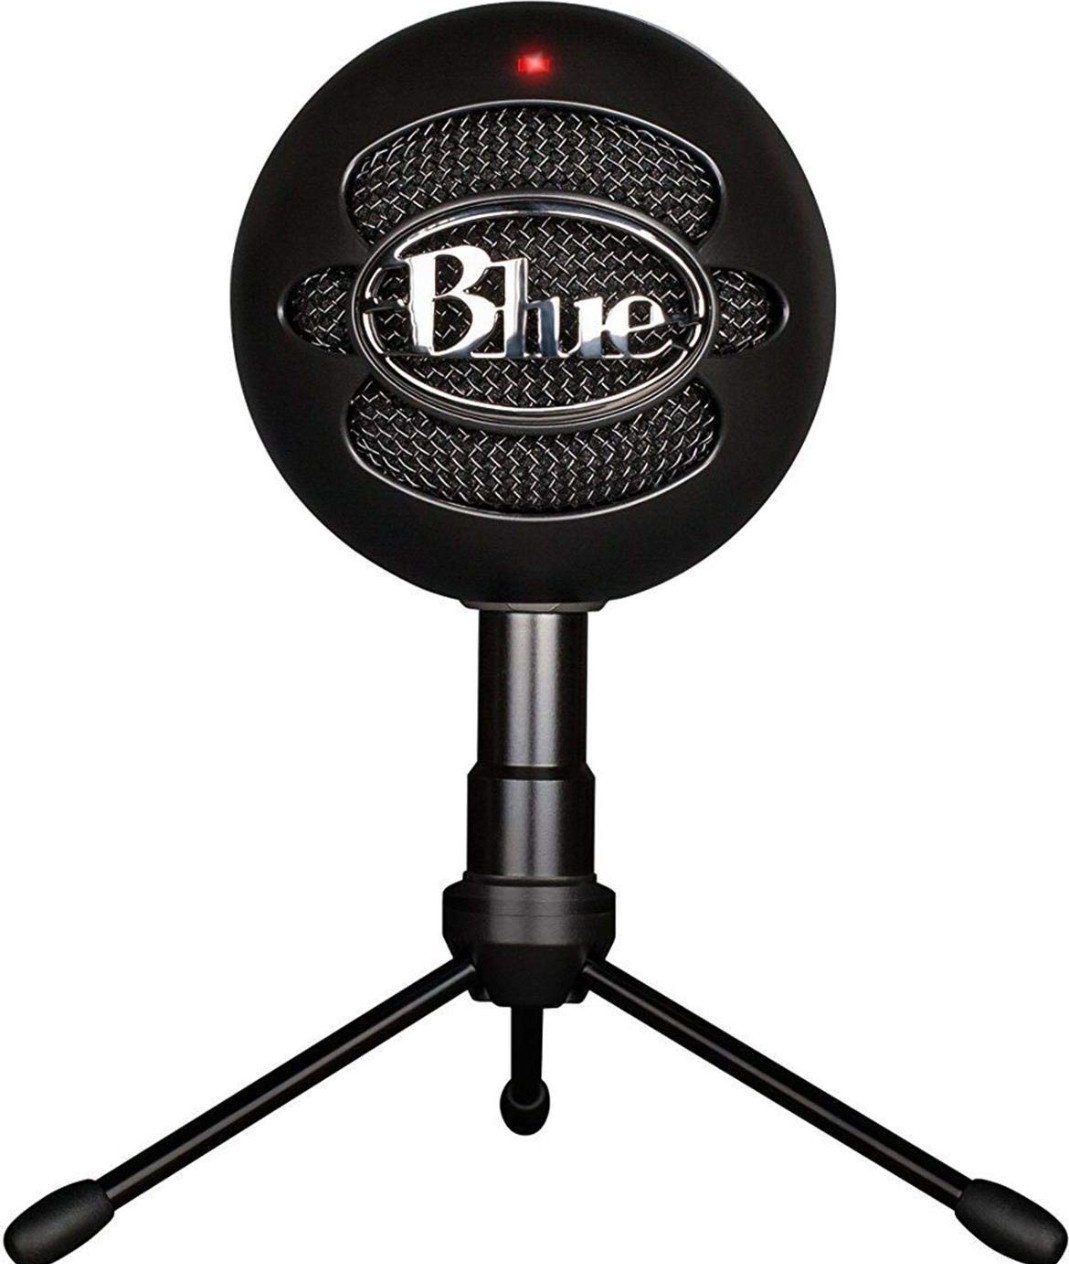 Zoom image: Microphone on a stand.